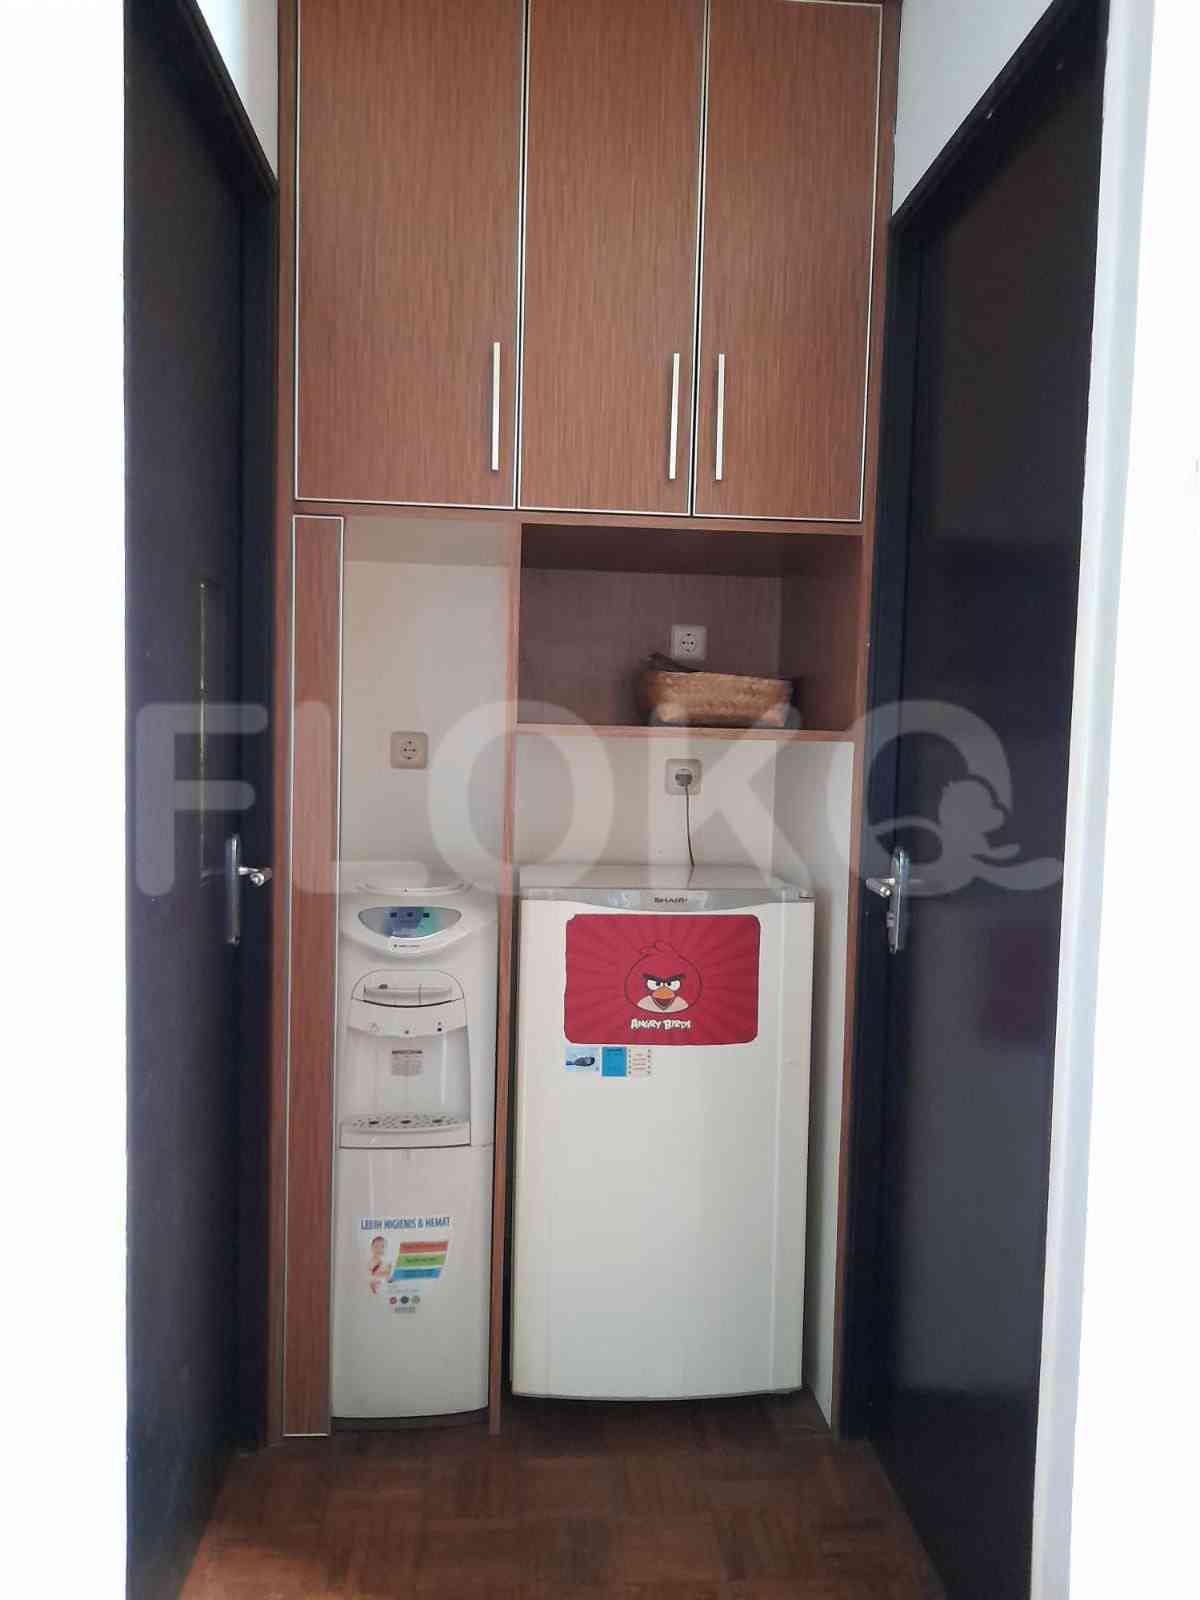 2 Bedroom on 11th Floor for Rent in Sentra Timur Residence - fcaf15 1